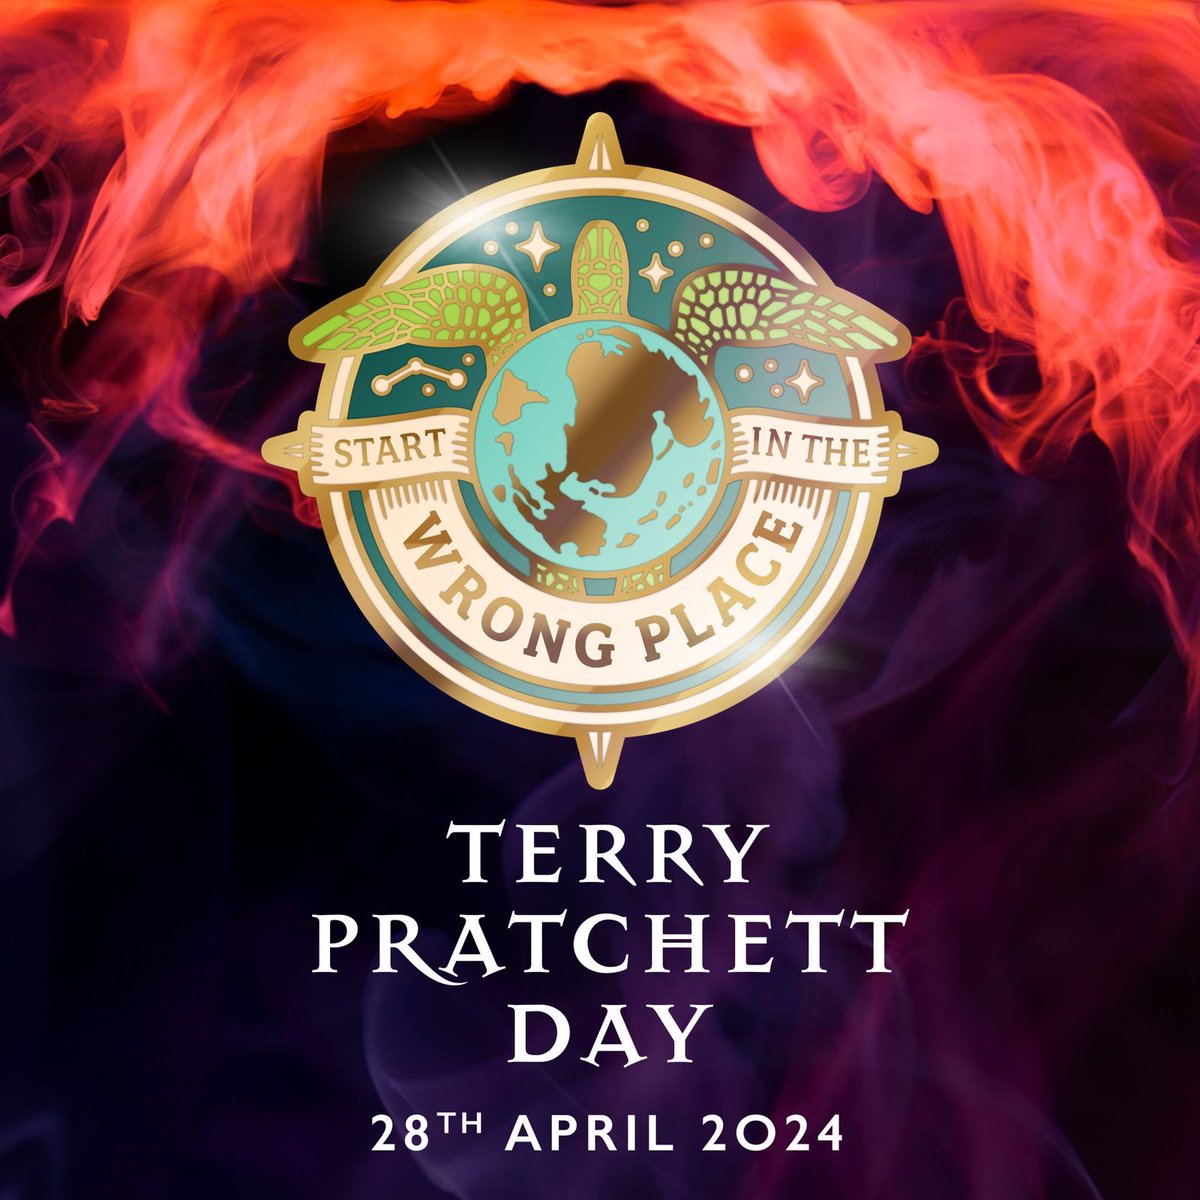 Announcing the theme for #TerryPratchettDay 2024: START IN THE WRONG PLACE.  
   
There is no right or wrong place to start with Terry Pratchett’s work, so let's truly celebrate the joy and chaos to be found in these many routes through Discworld and beyond.